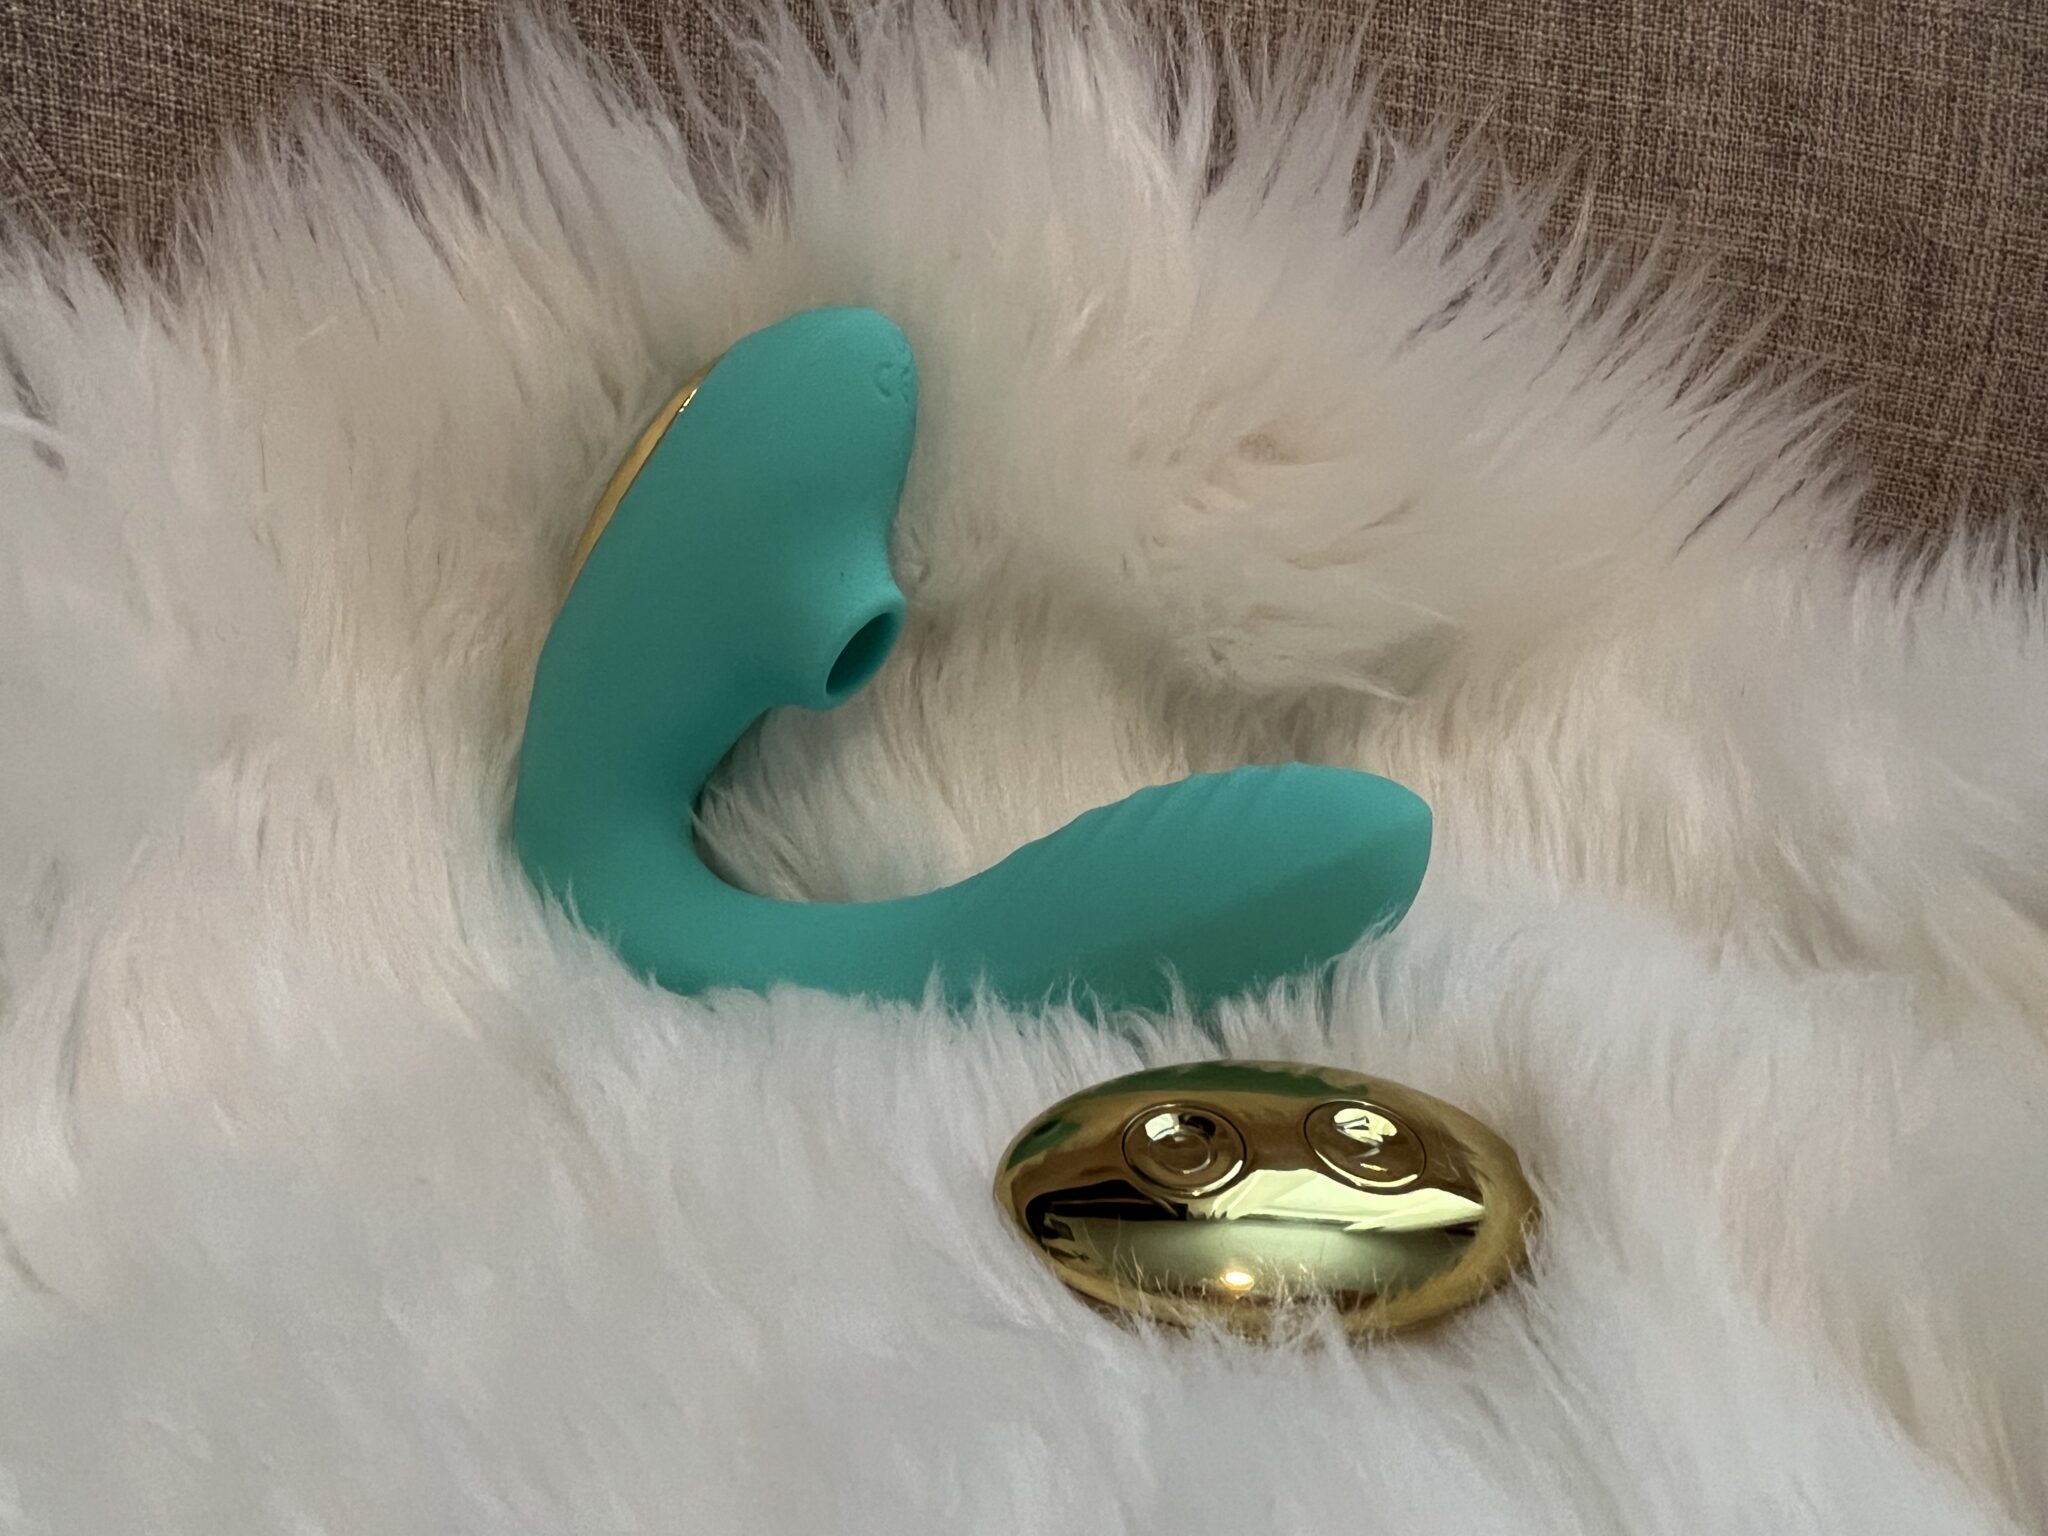 This teal and gold clitoral sucking vibrator curves to fit and vibrate within you while stimulating you from the outside.